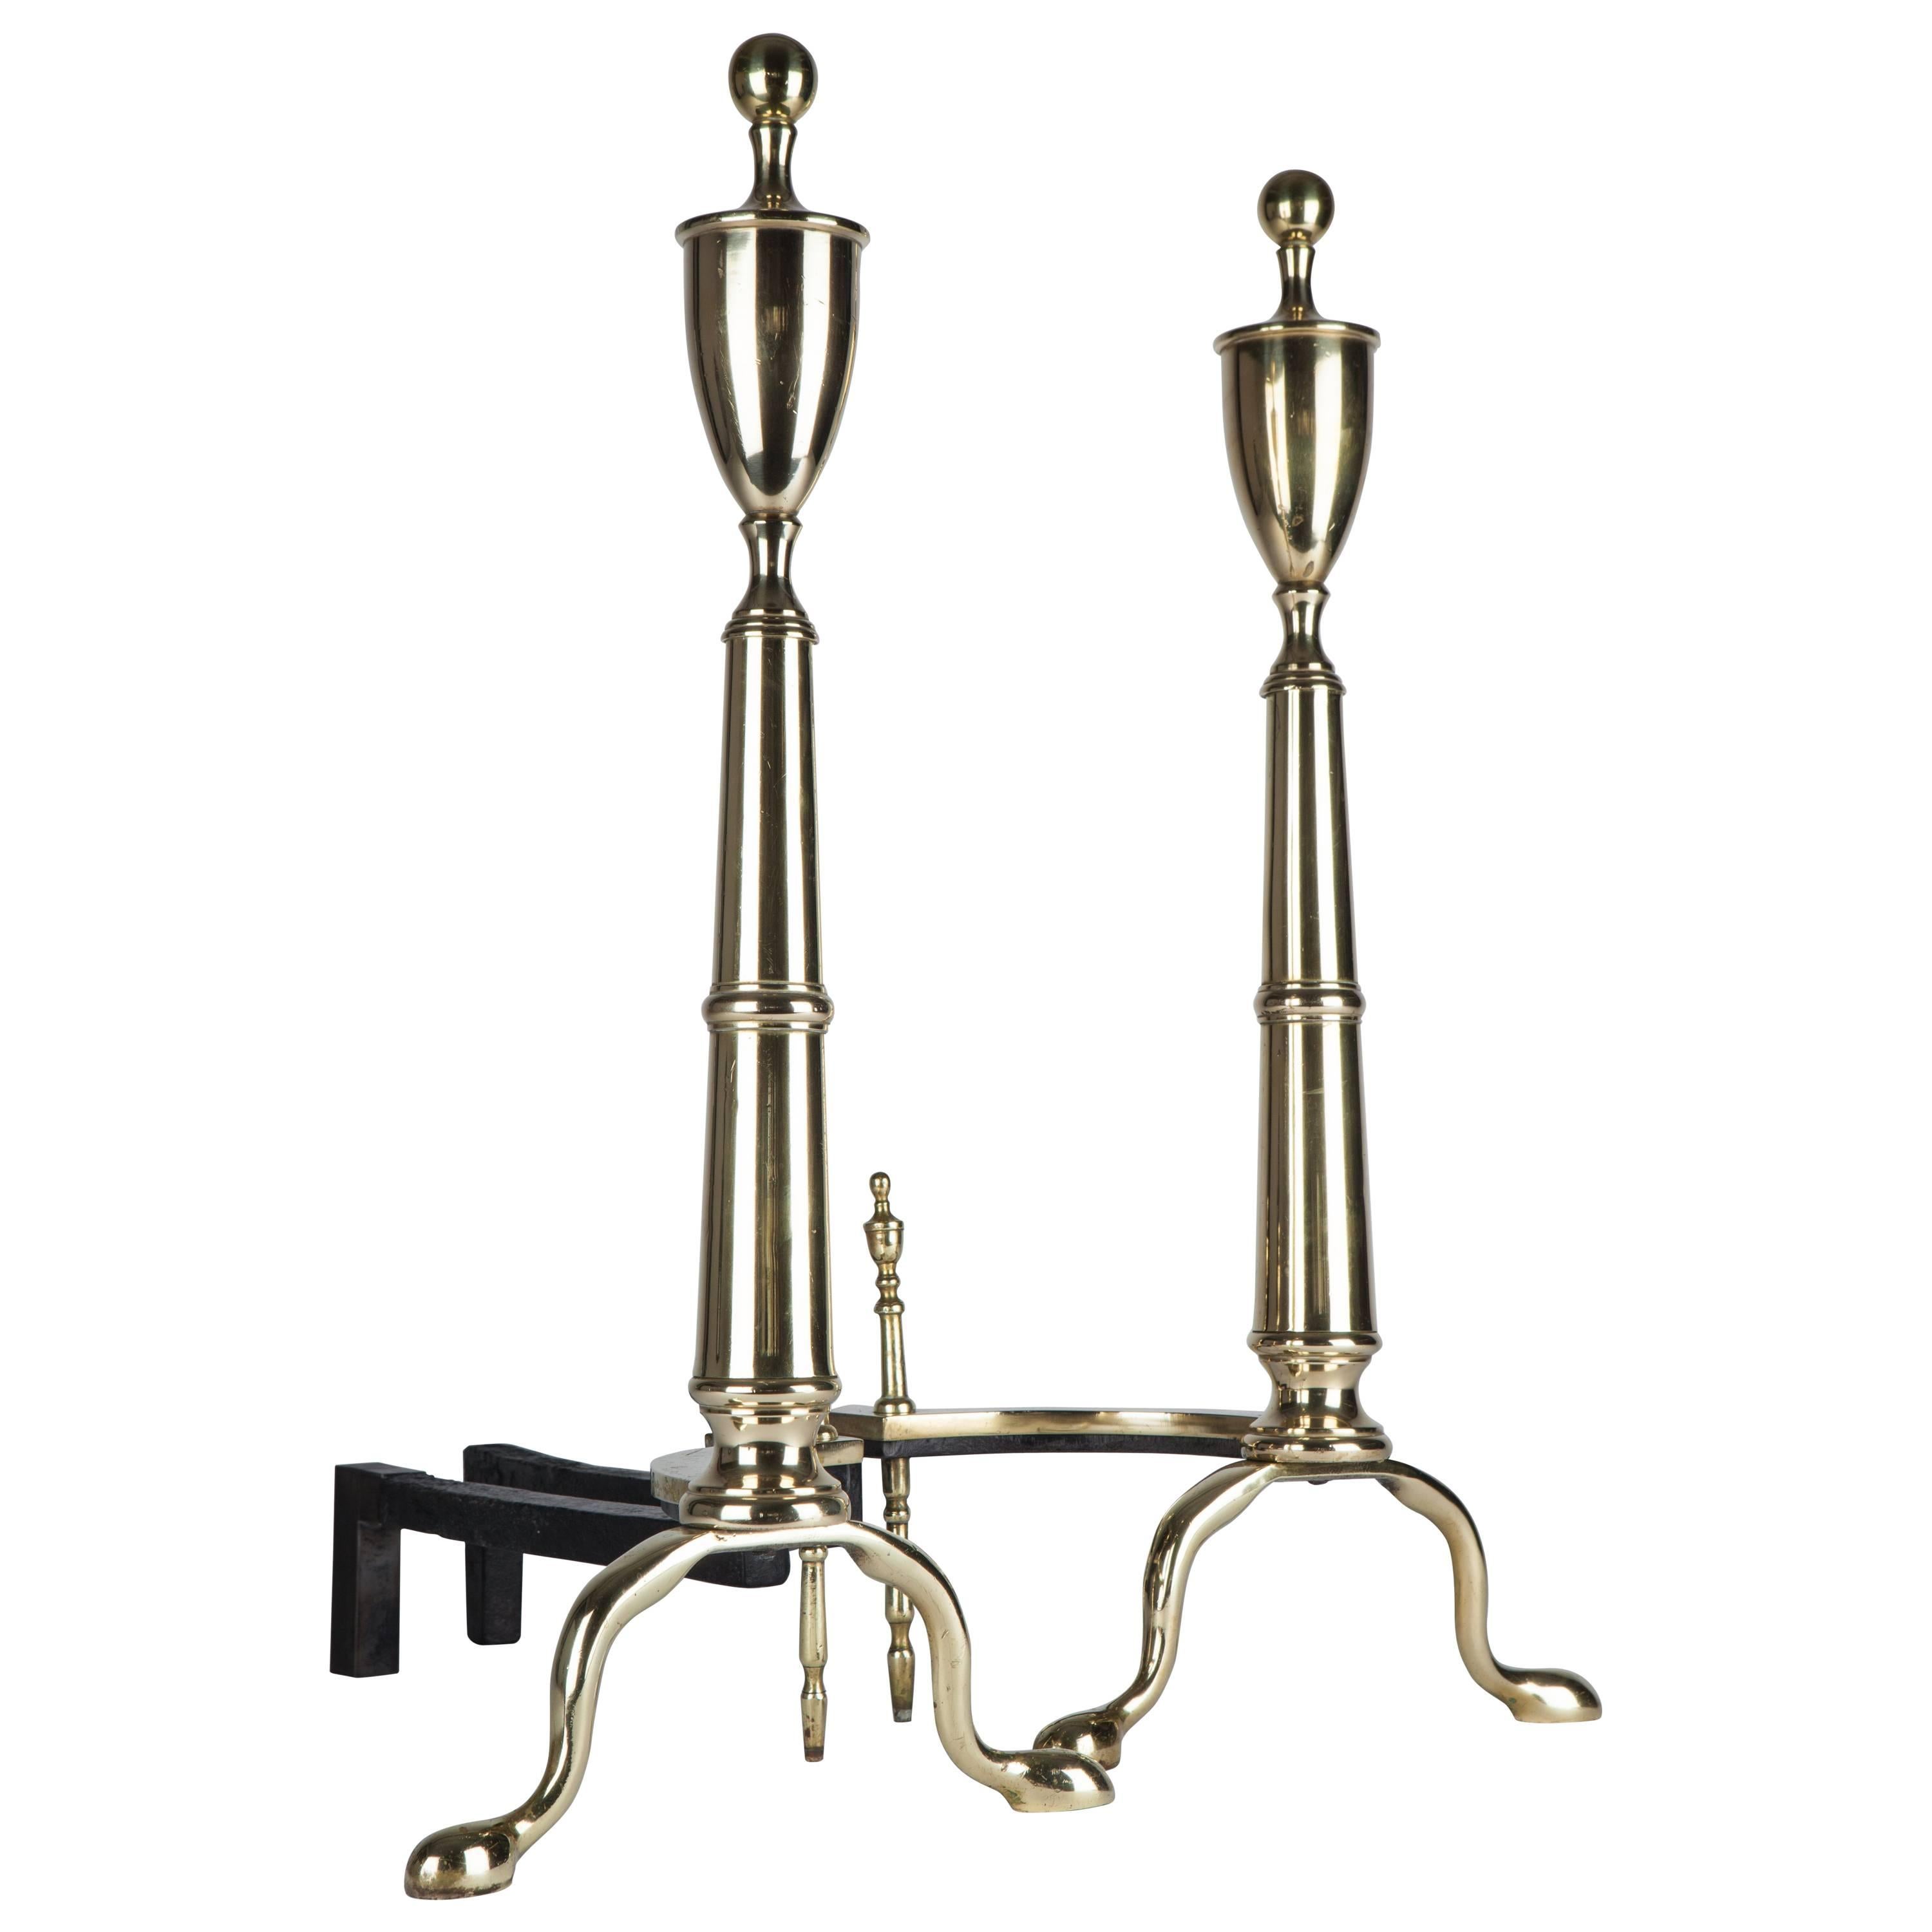 Pair of American Brass Urn Finial Andirons with Penny Feet